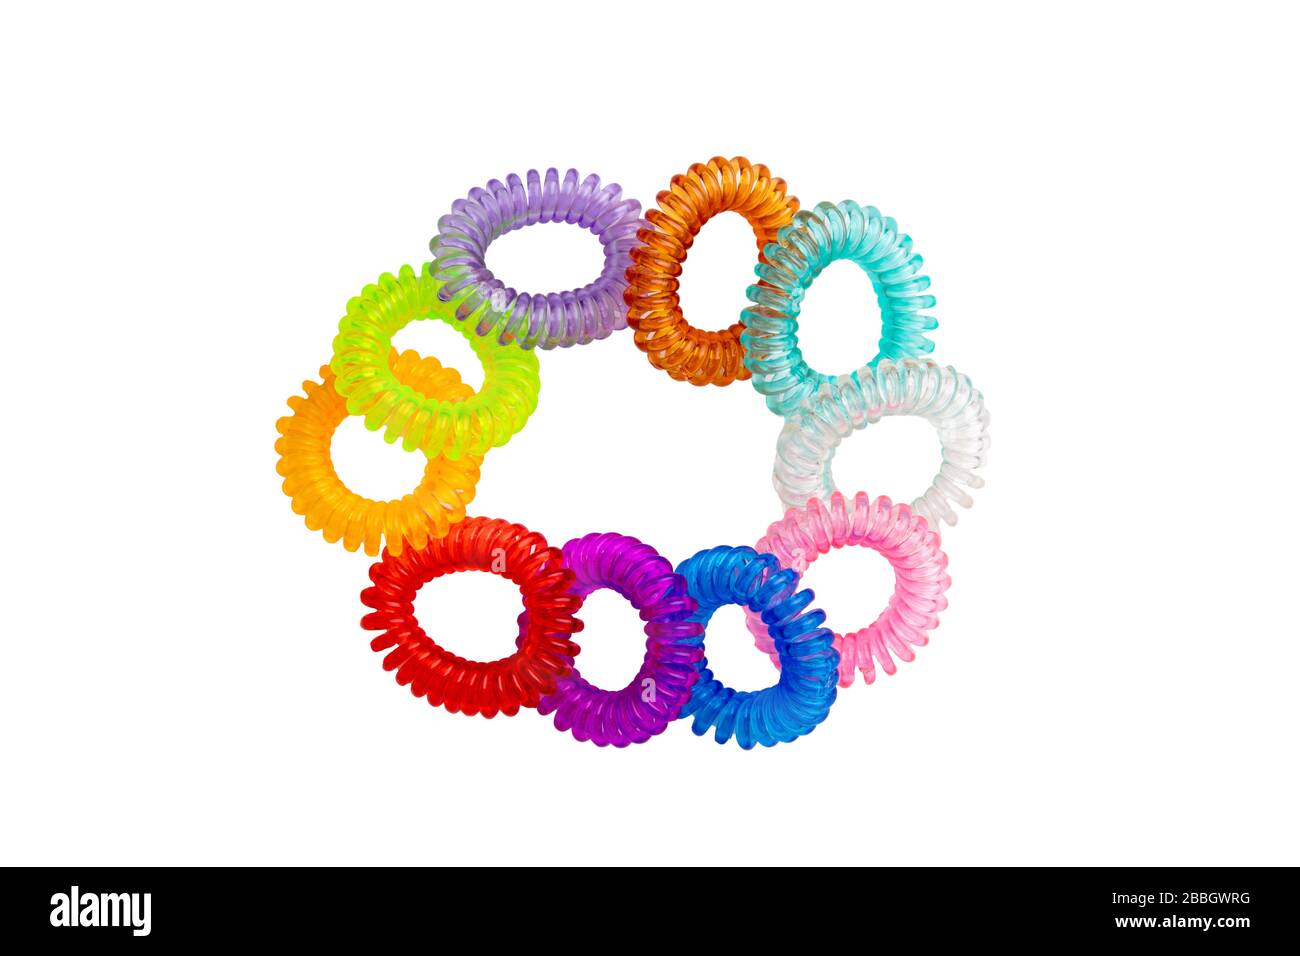 Hair care tools isolated. Close-up of multicolored elastic spiral scrunchies or hair bands for women hairstyling isolated on a white background. Tools Stock Photo